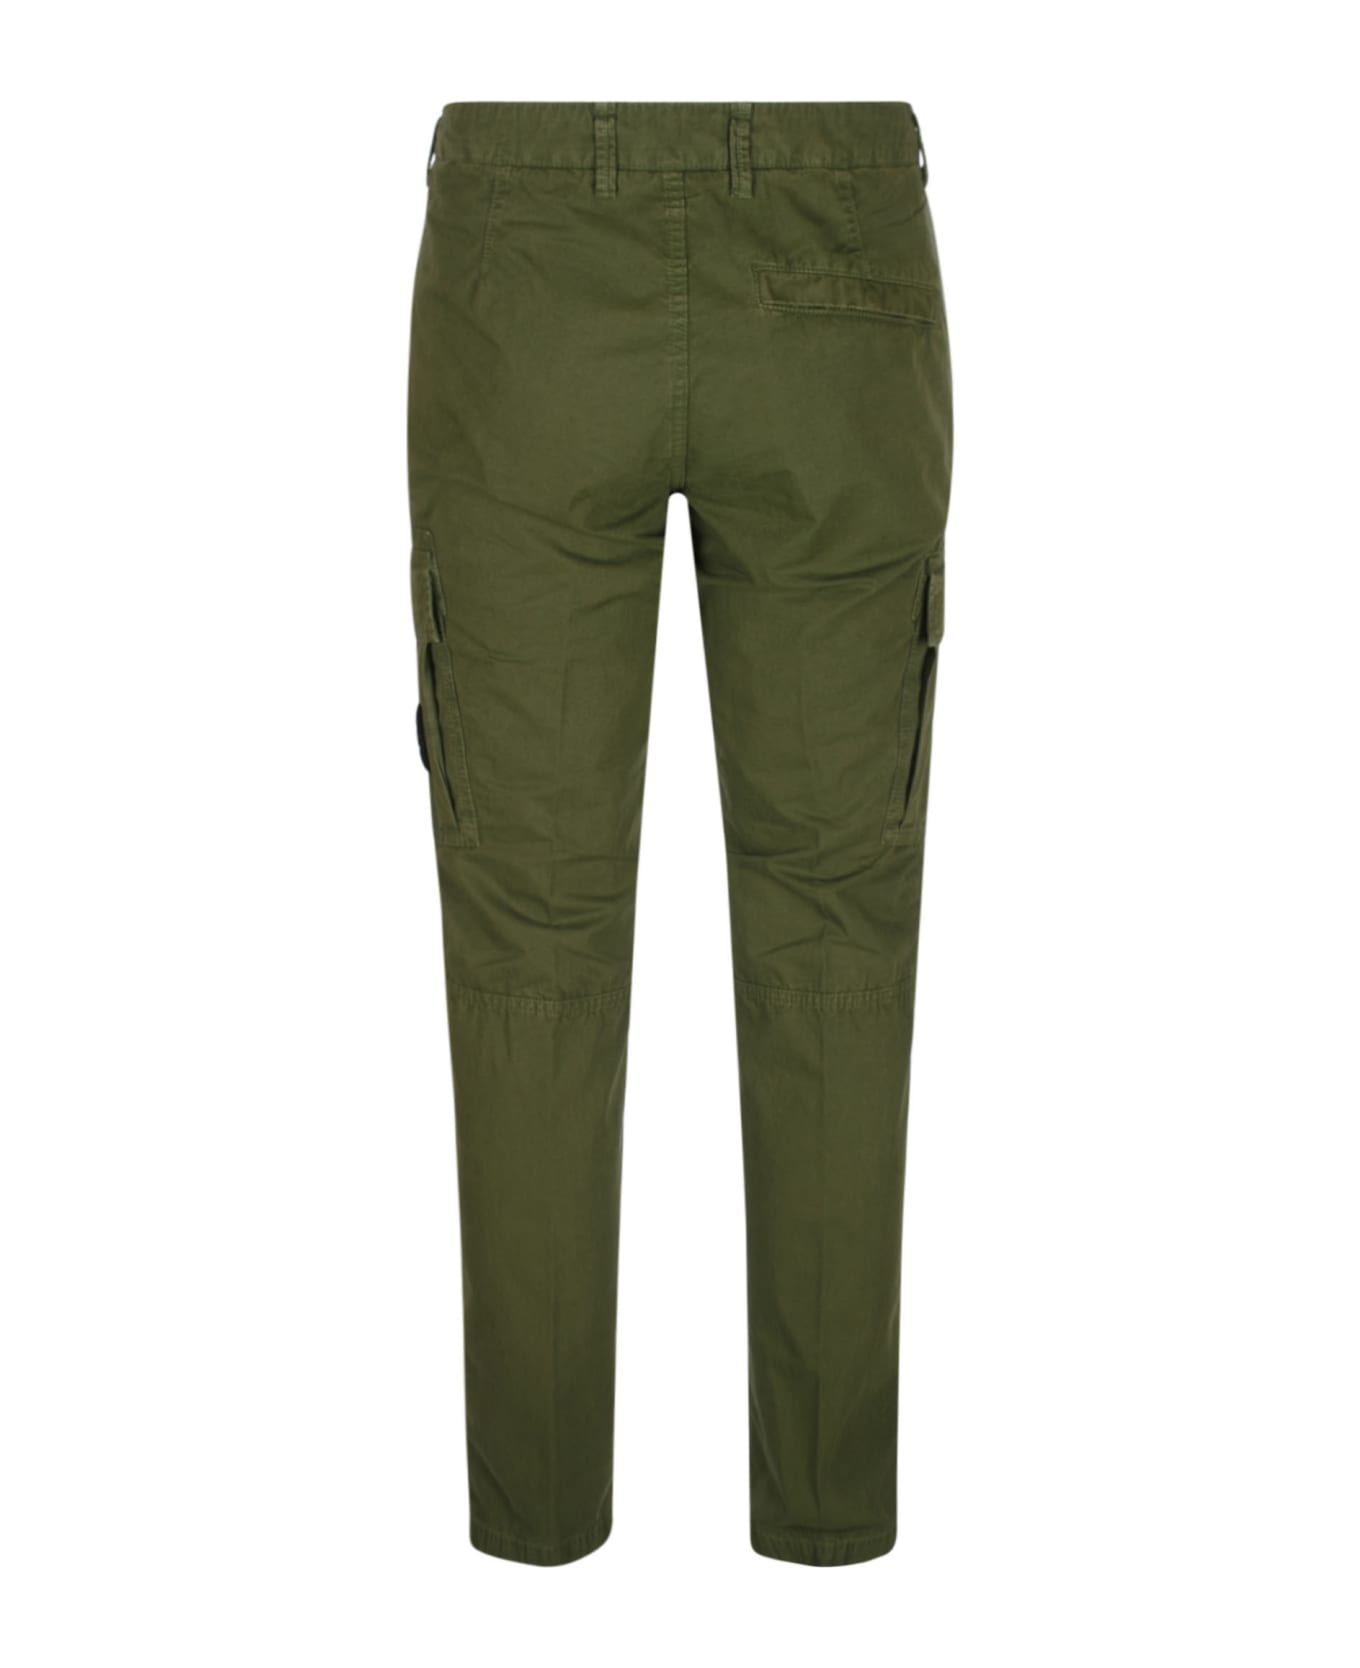 Stone Island Cargo Buttoned Trousers - V0158